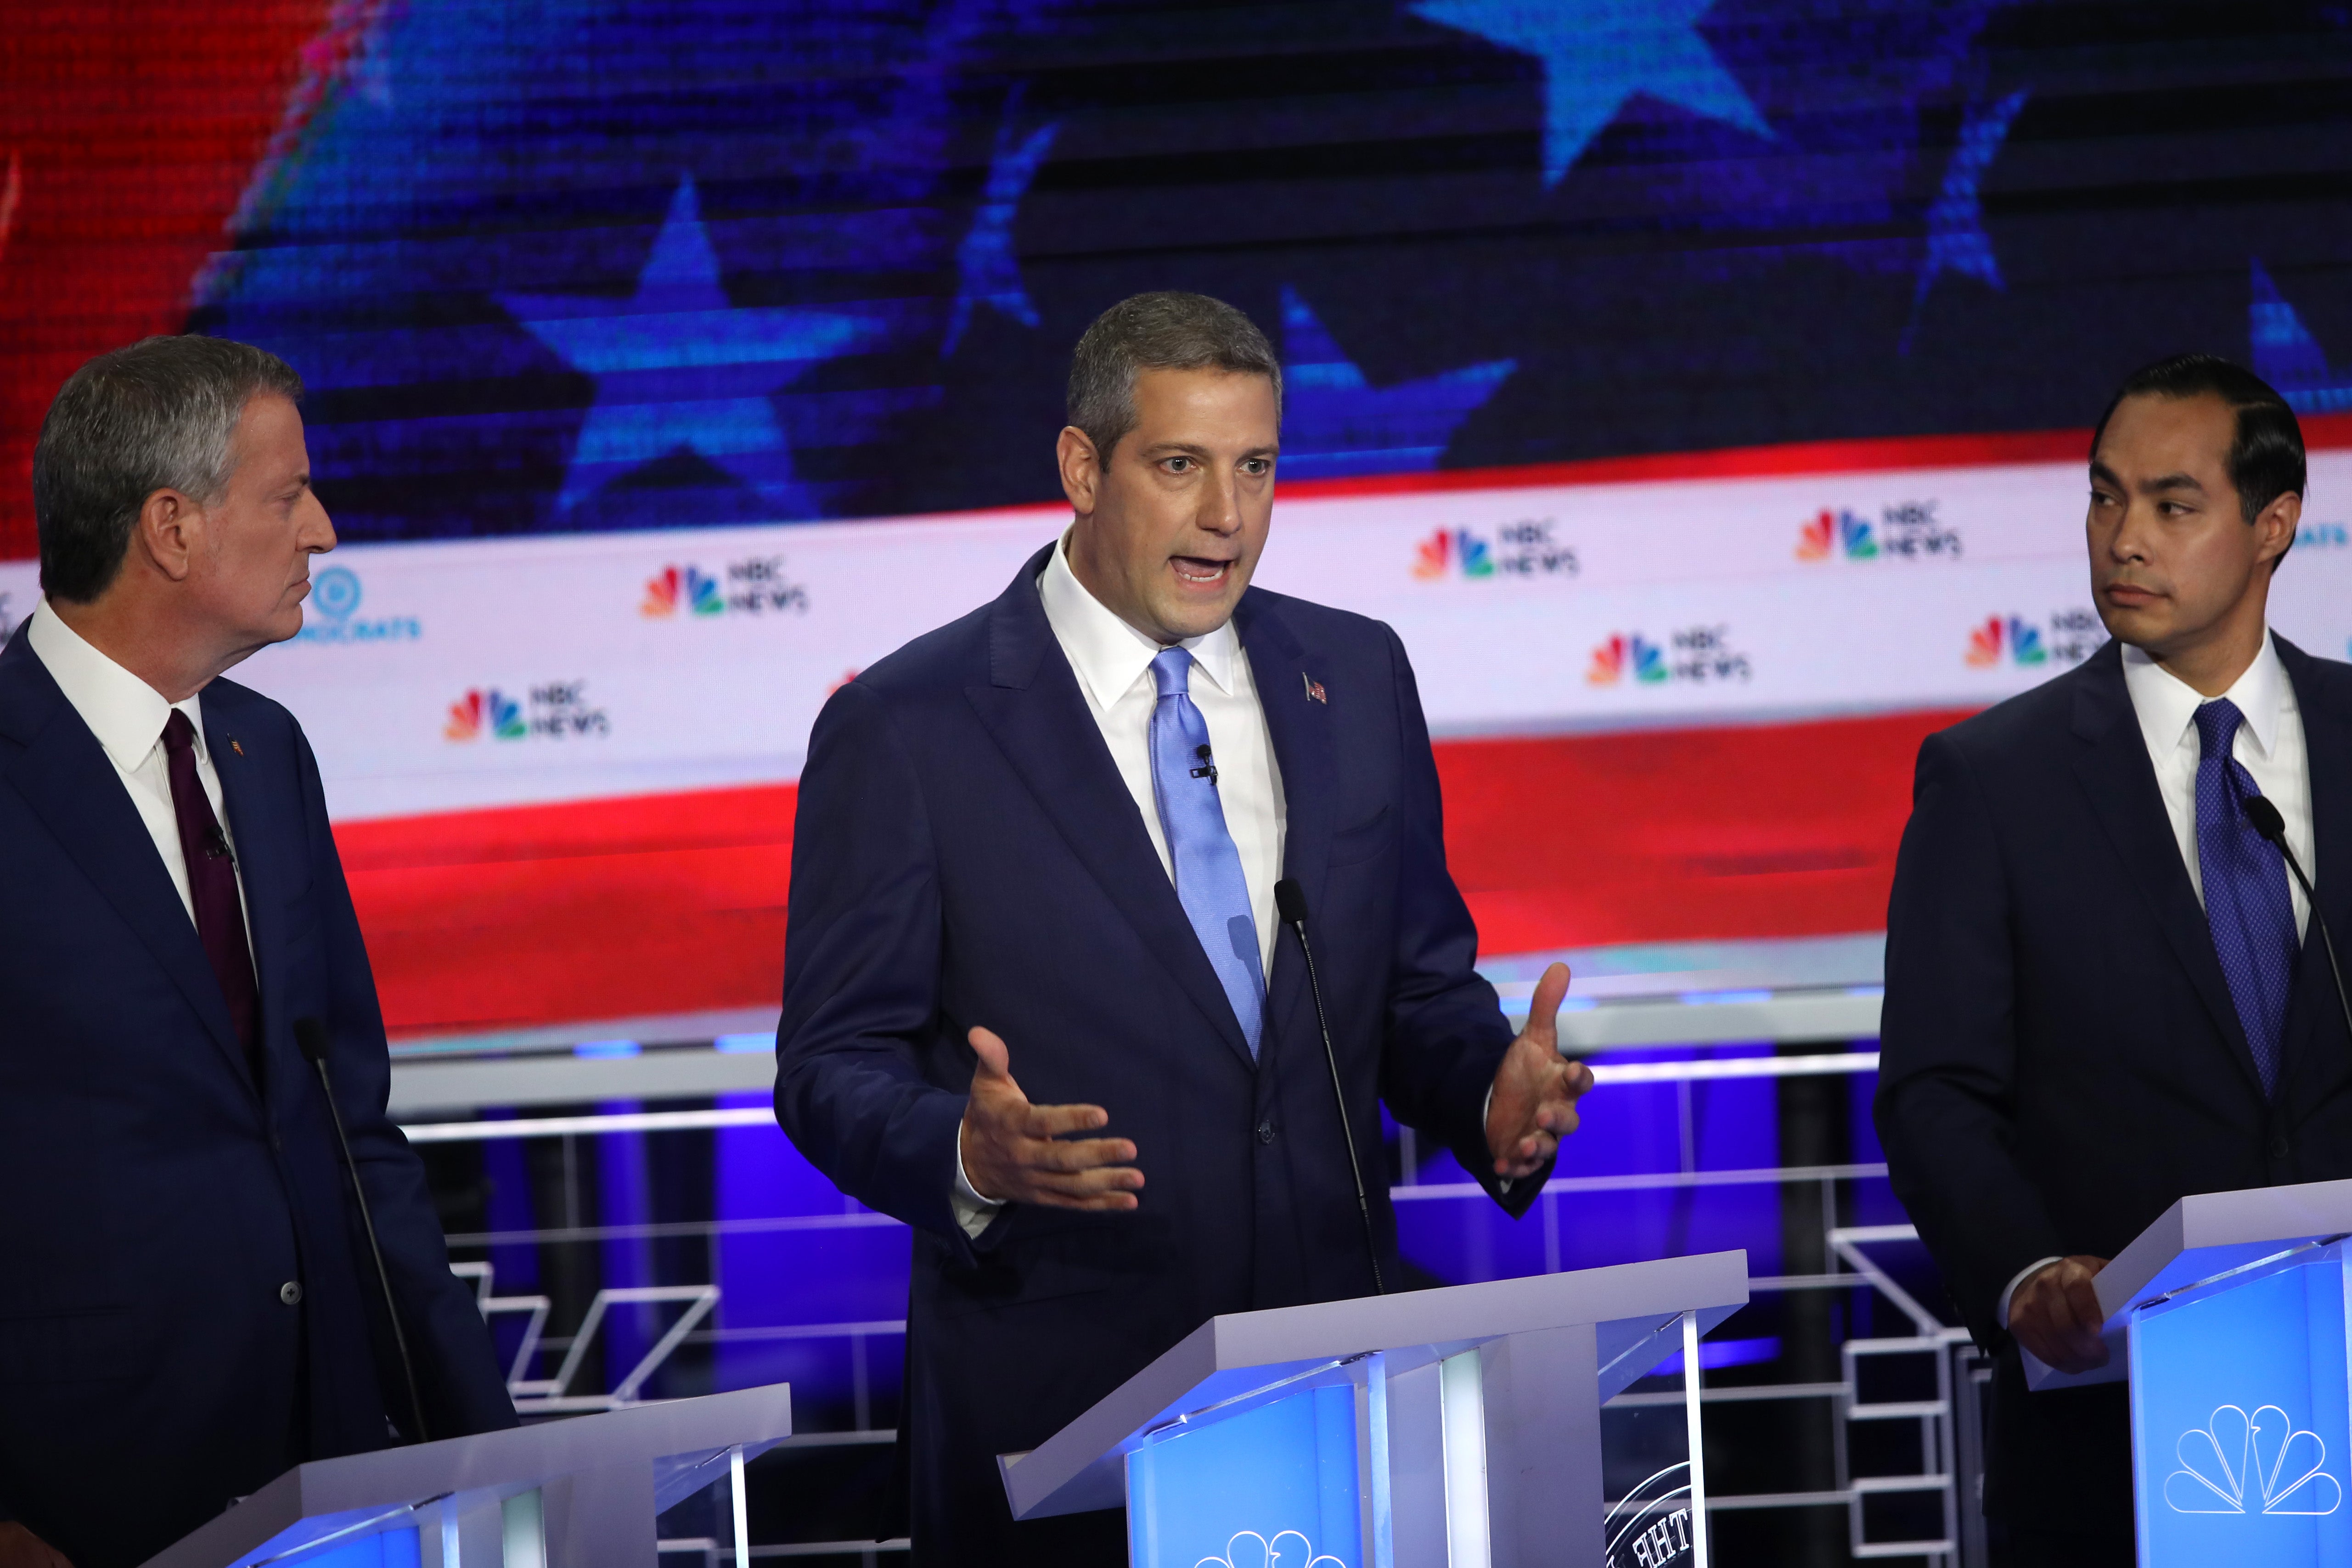 Tim Ryan speaking at a Democratic Party primary debate ahead of the 2020 election